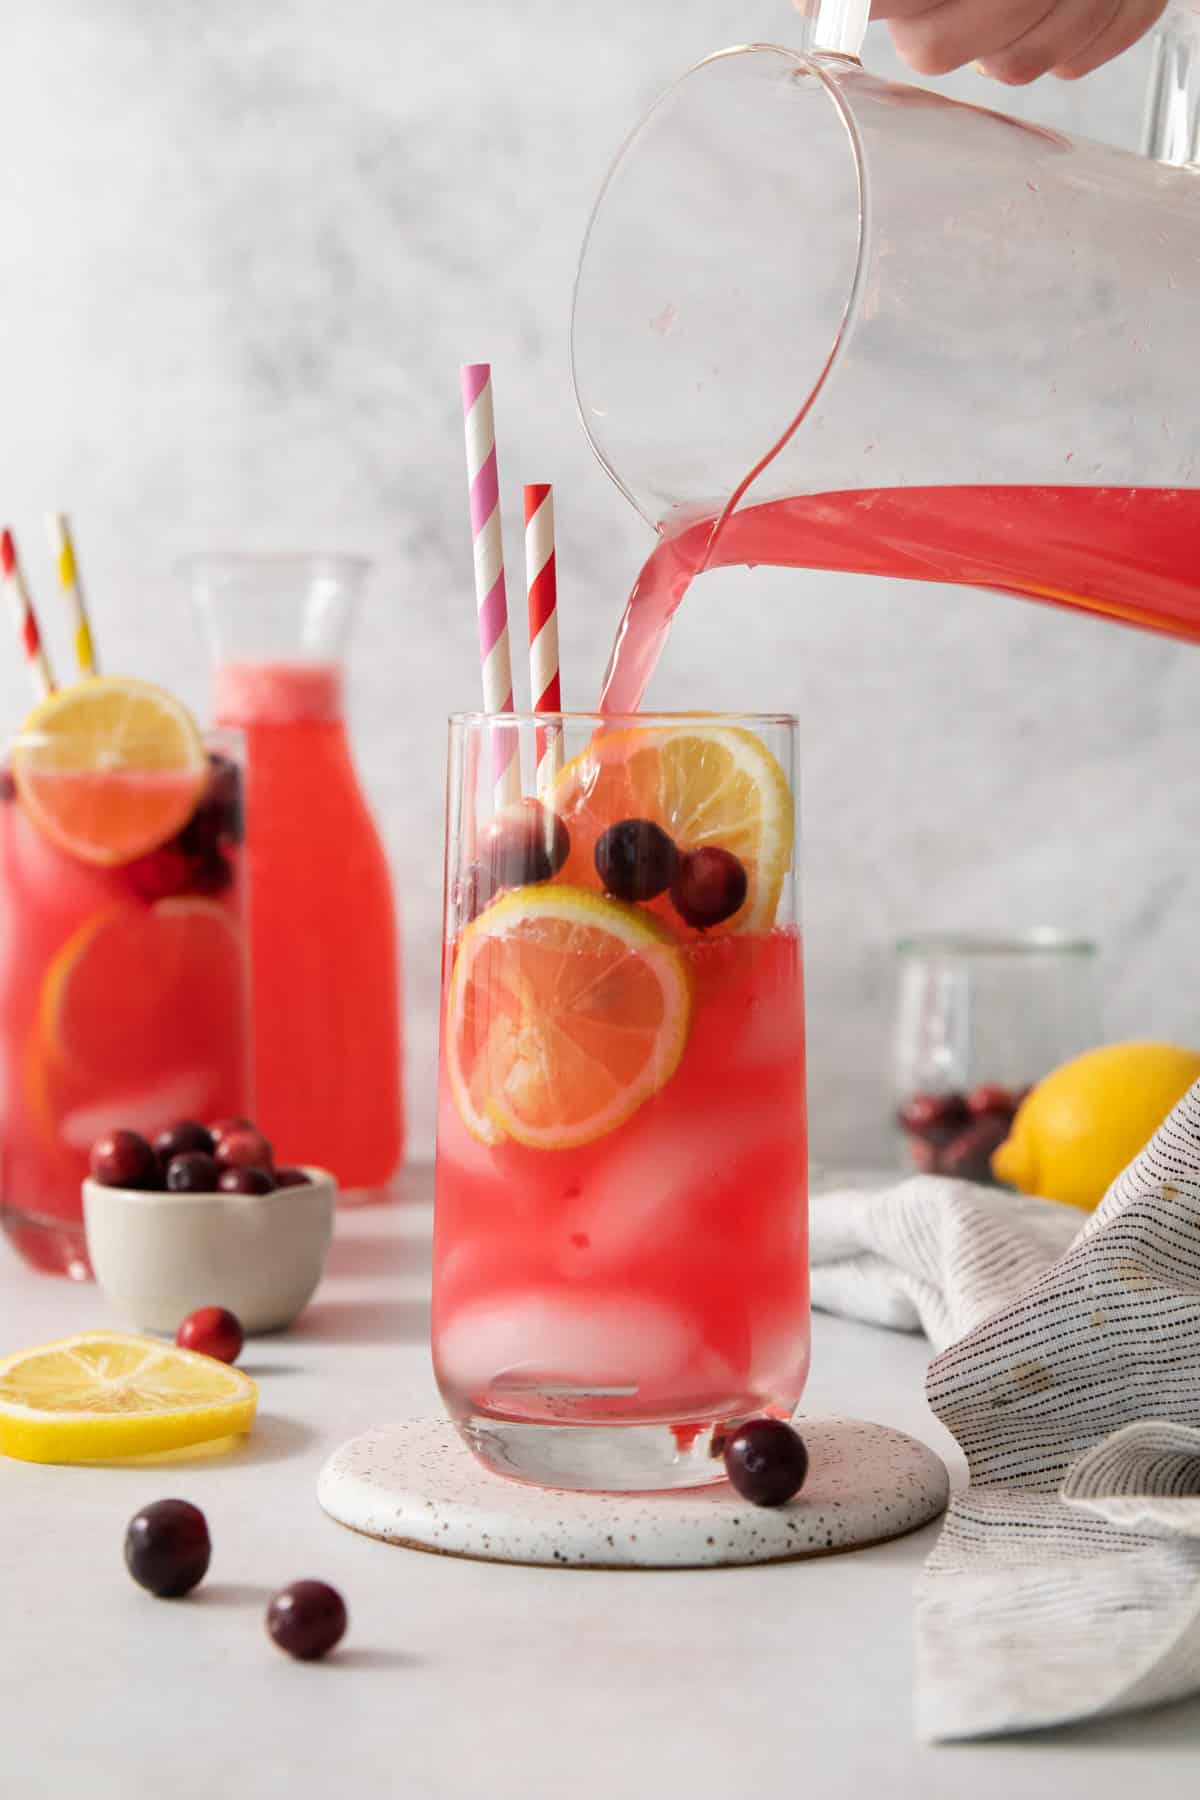 cranberry lemonade being poured into a glass.